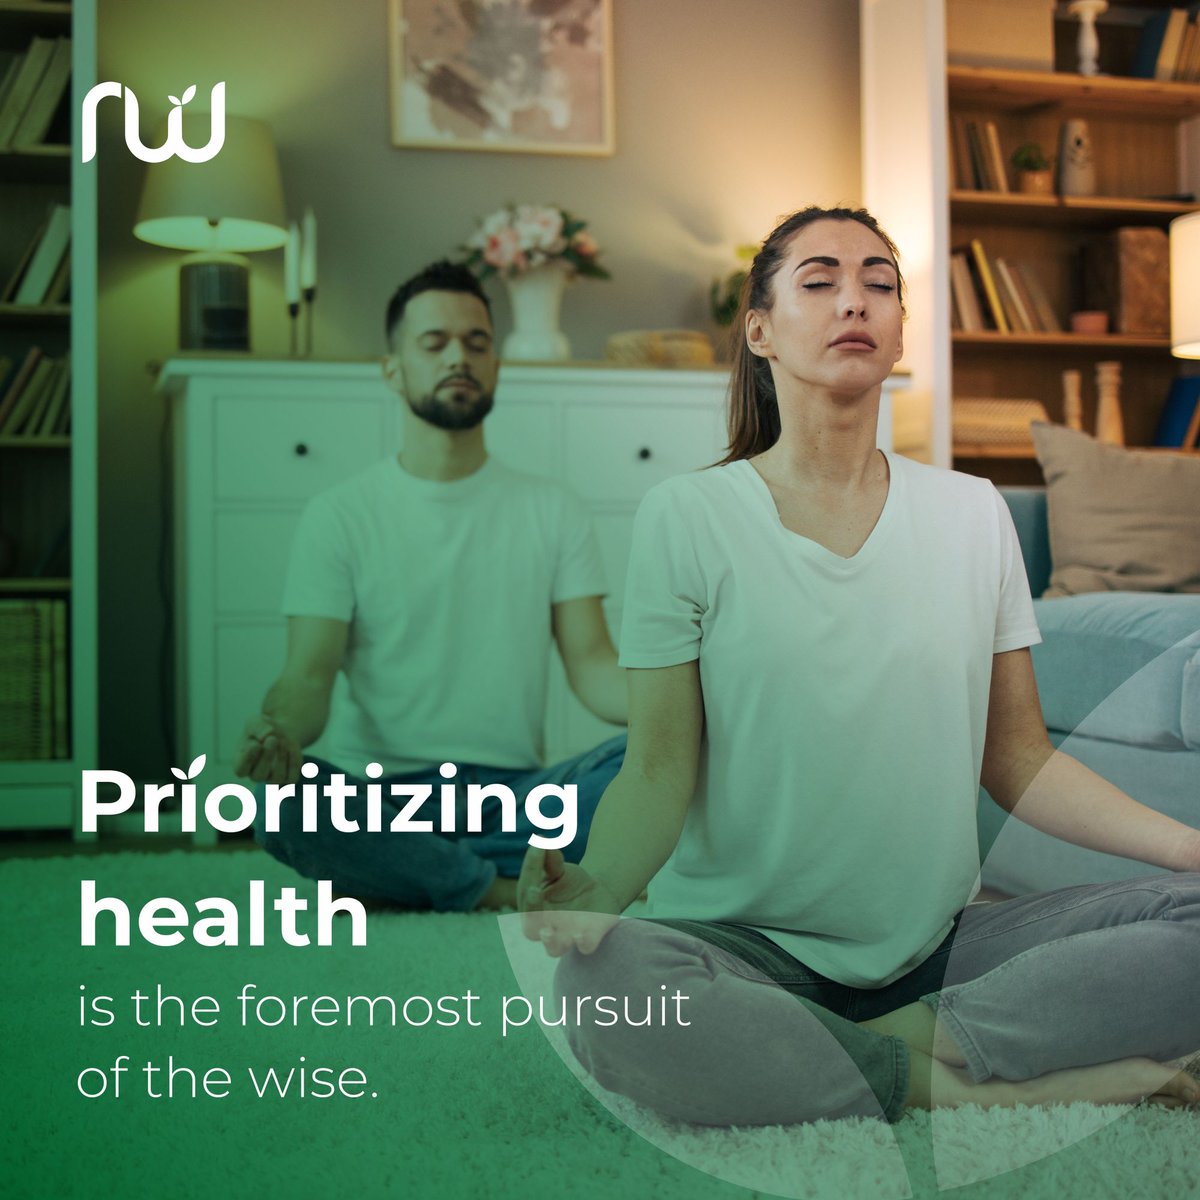 Prioritize health for prosperity and wisdom with Rustic Wisdom. Join now for tangible benefits.
#RusticWisdom
#HolisticHealth
#HealthyLifestyle
#PreventiveCare
#WellnessJourney
#ThriveNotSurvive
#ResilientHealth
#StrongerYou
#LiveWell
#HealthyBodyHealthyMind
#InvestInYourself